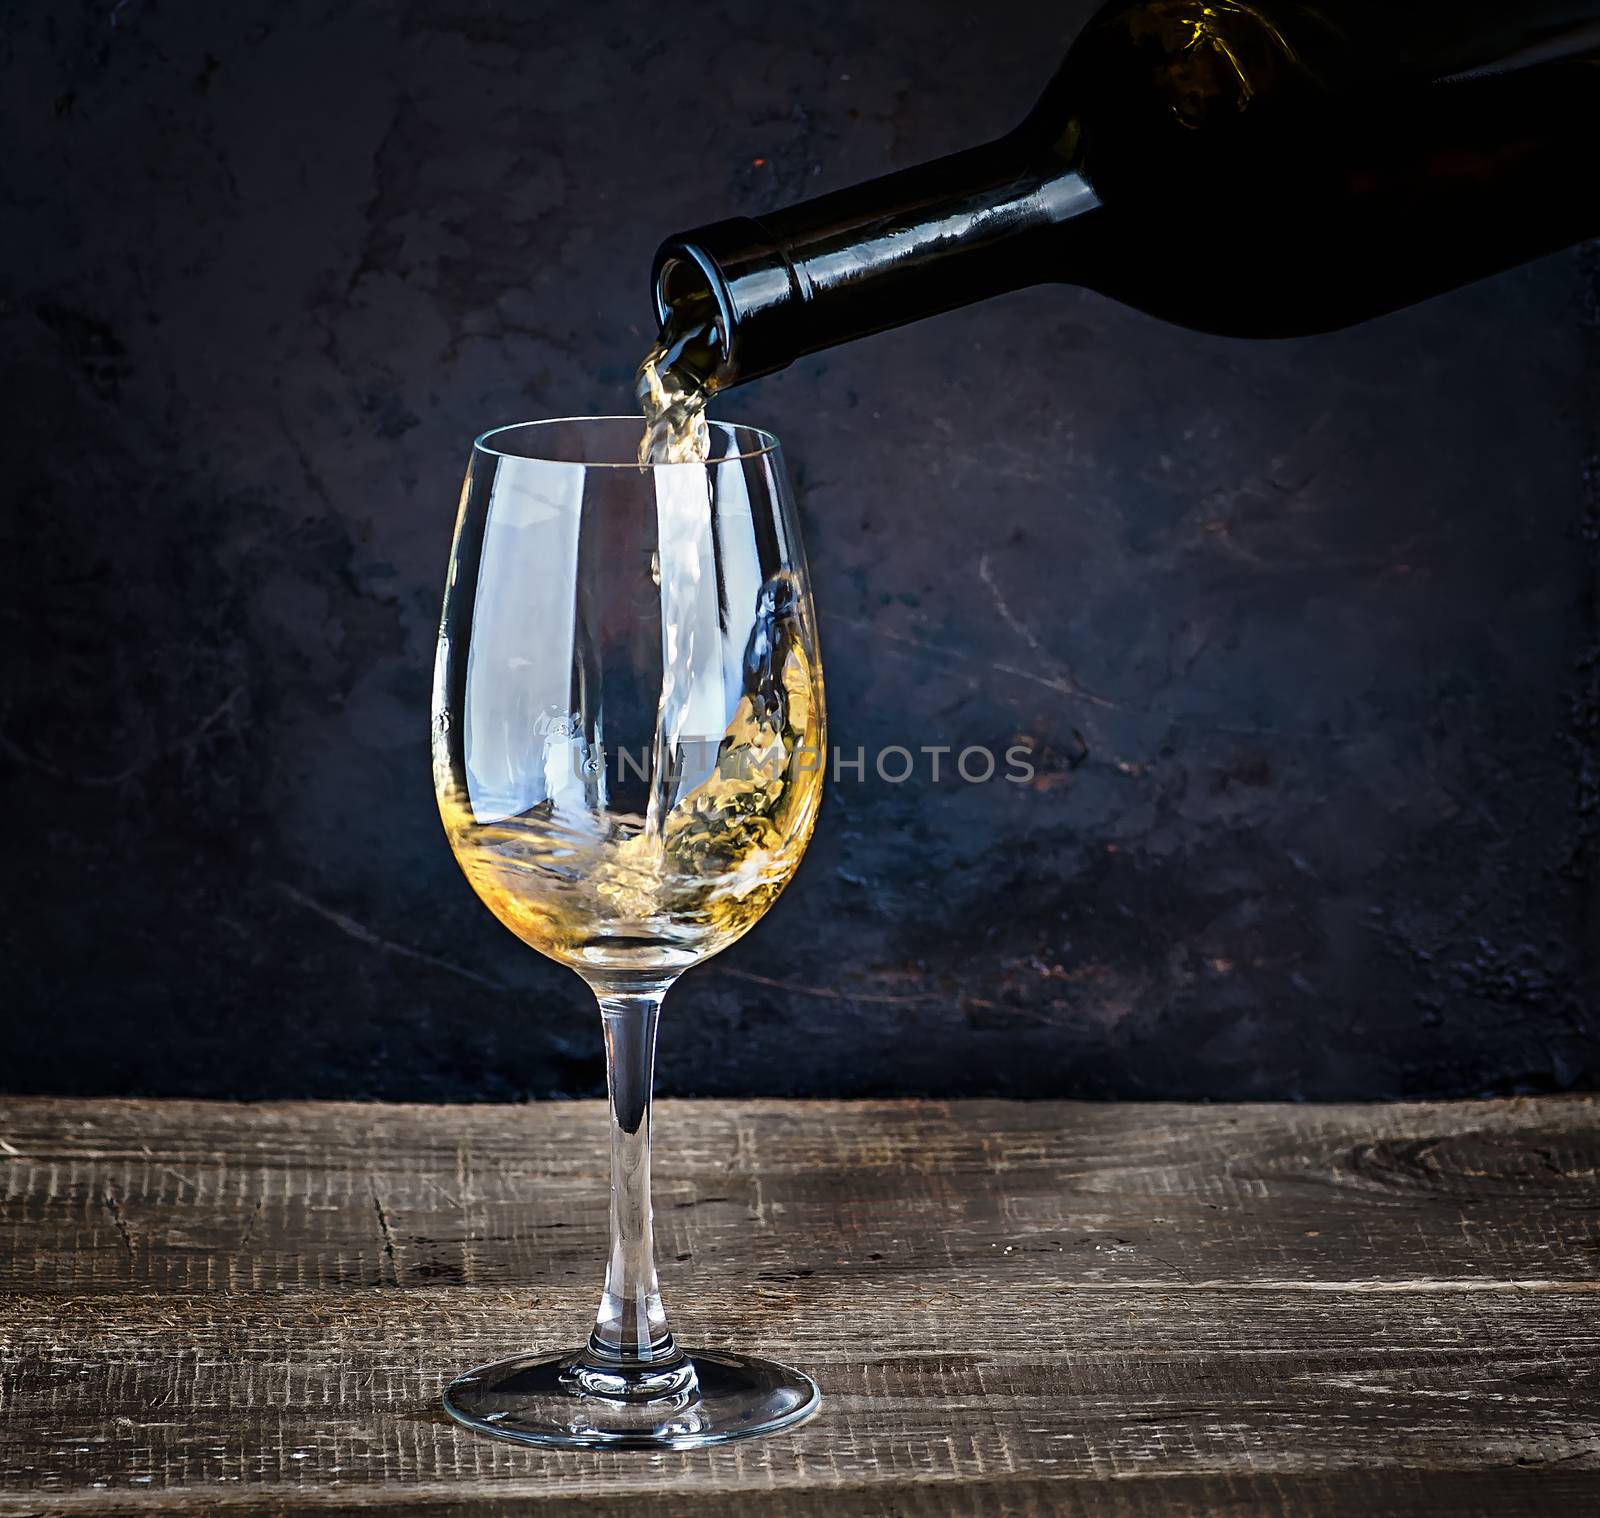 Pouring white wine from bottle into the wineglass on the table on dark blurred background